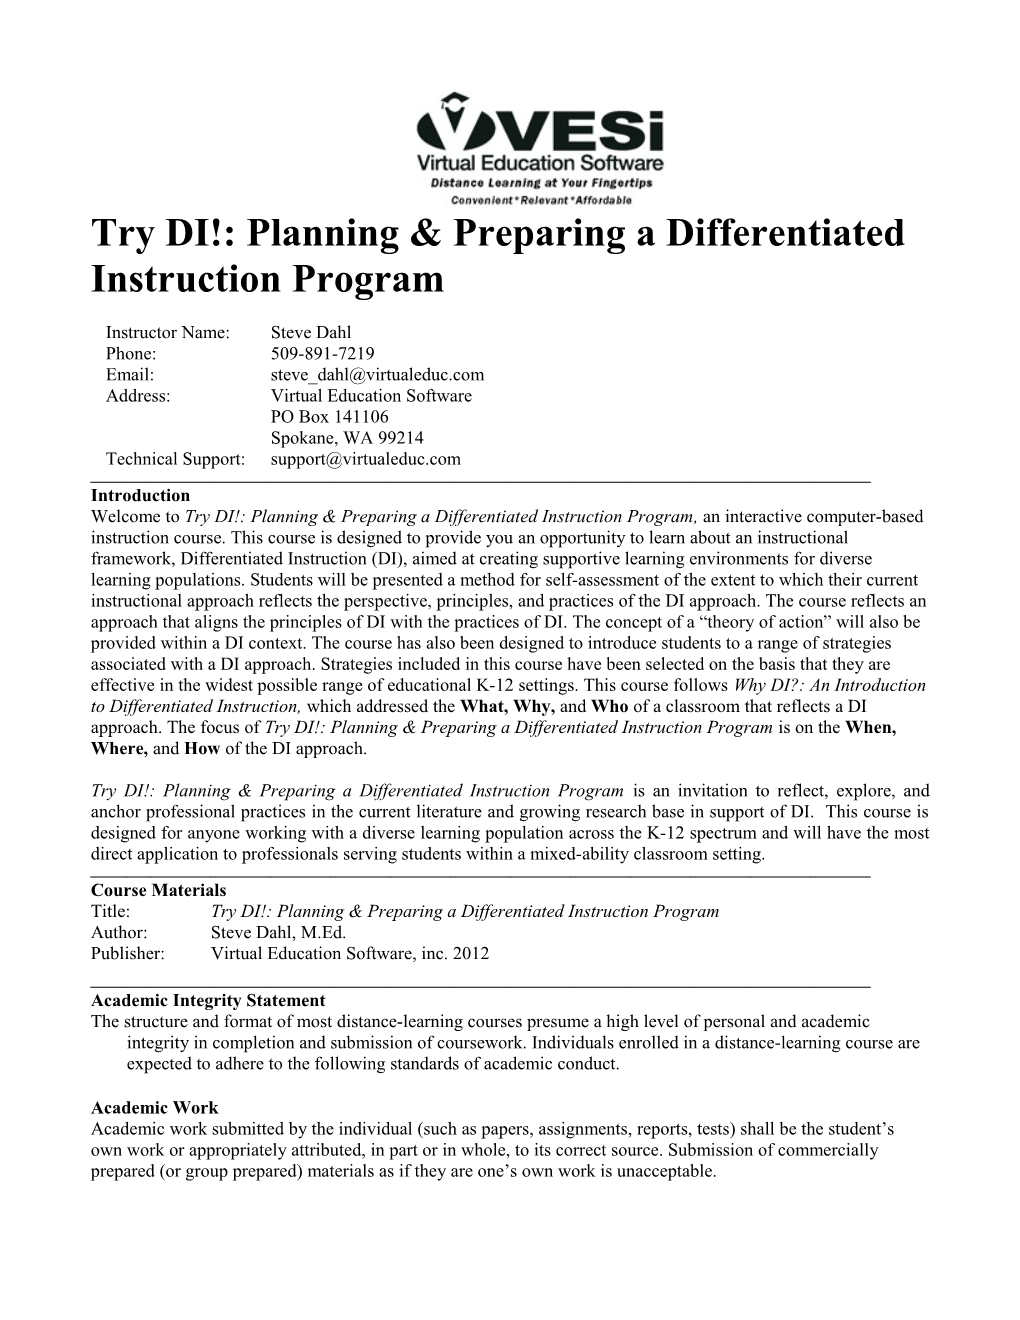 Try DI!:Planning & Preparing a Differentiated Instruction Program